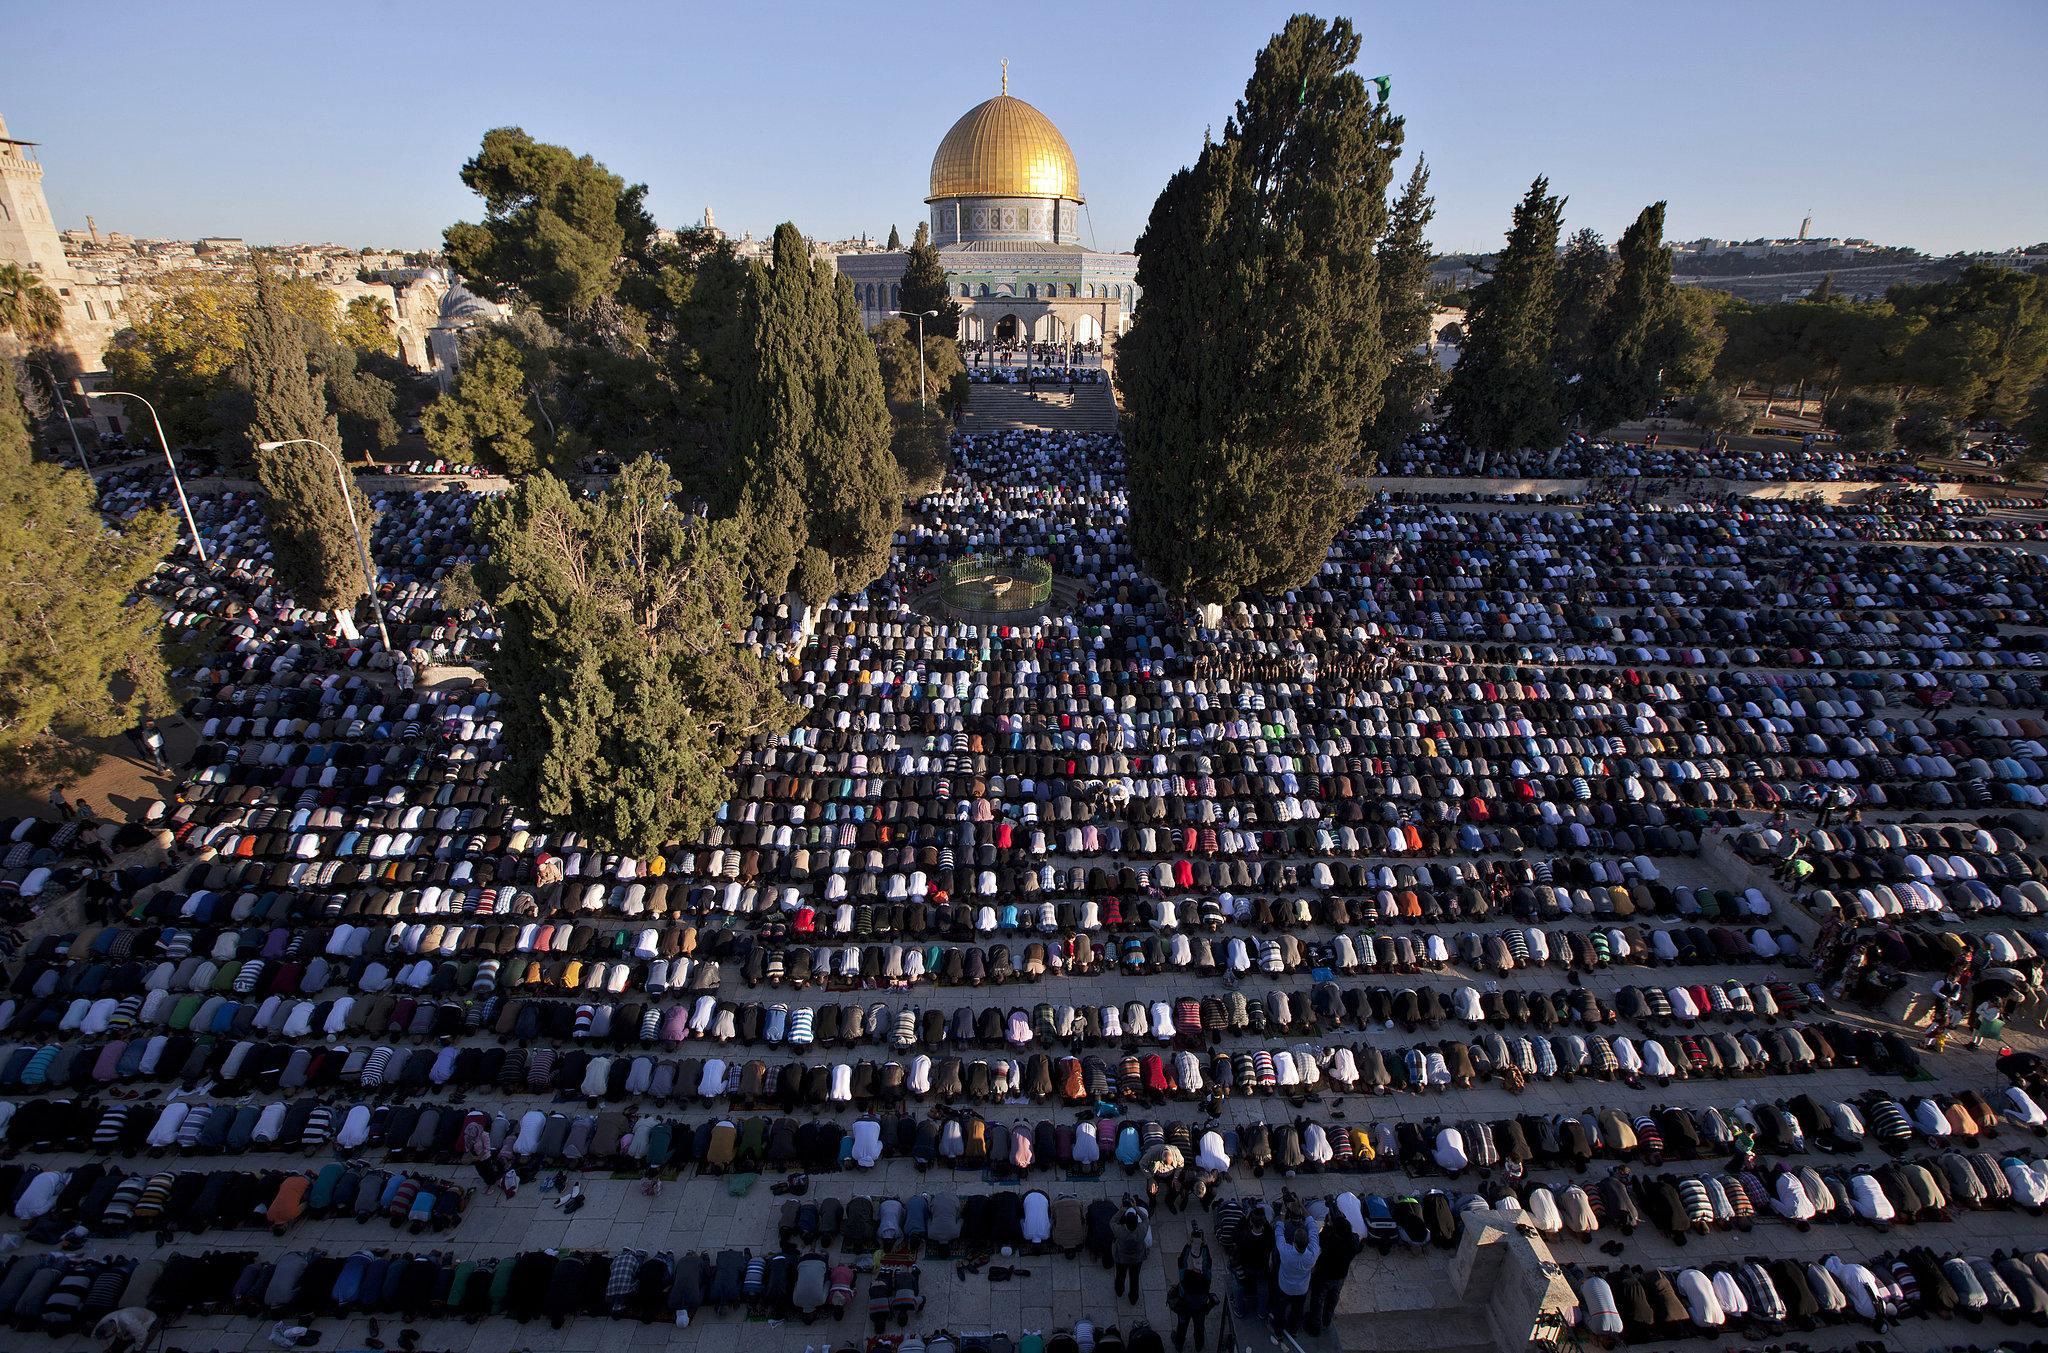 Eid Time: Special Blessings upon the Muslim Nation